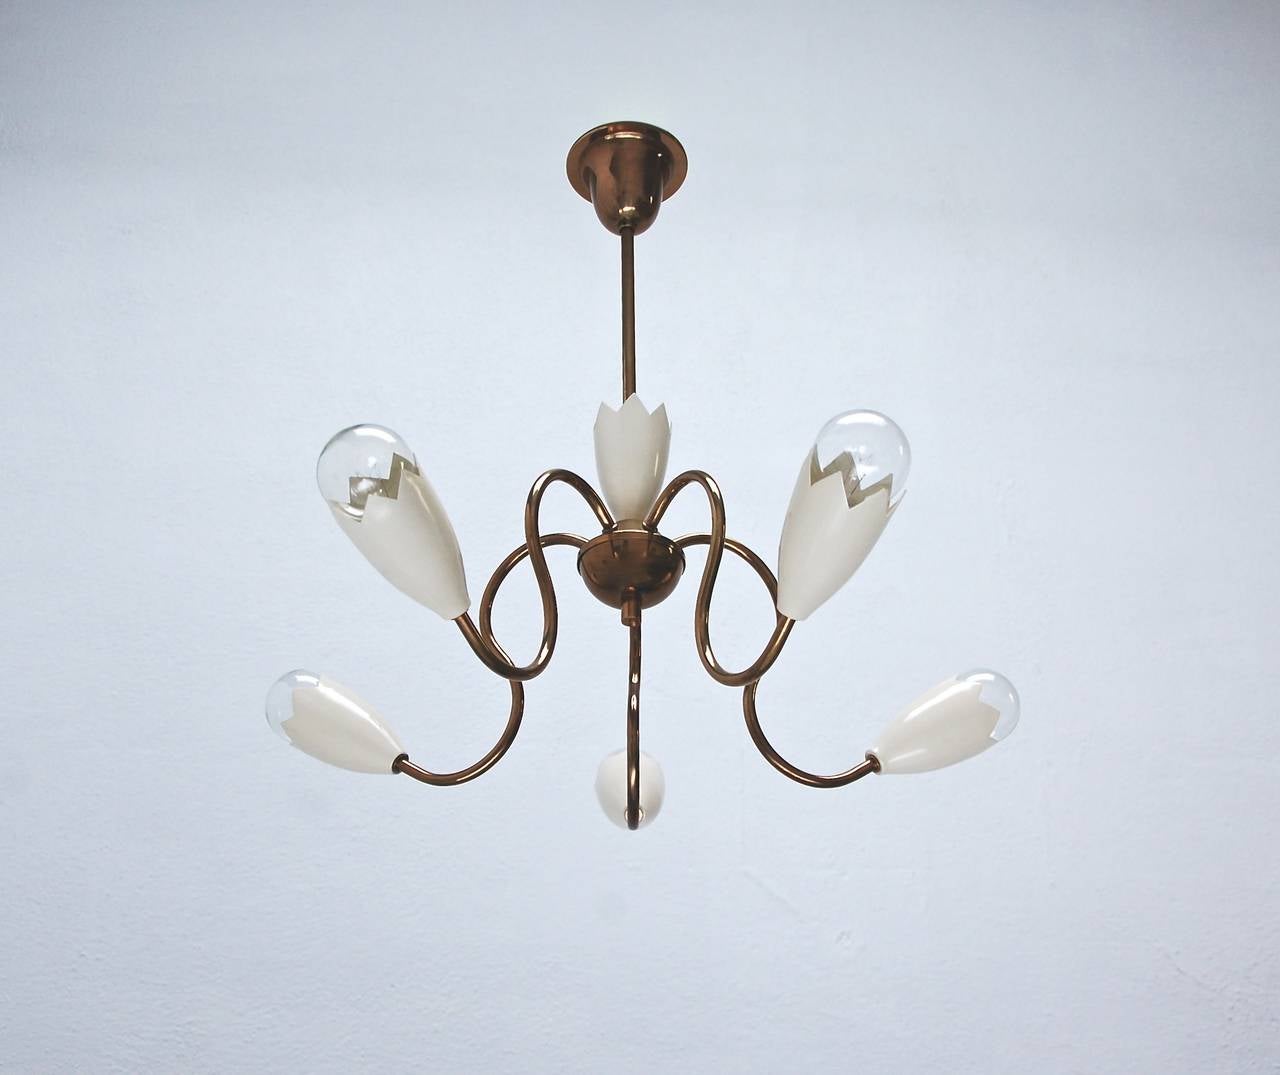 Beautiful Classic 5 light Italian petite chandelier by Arredoluce. Candelabra based sockets, rewired for us in the US.